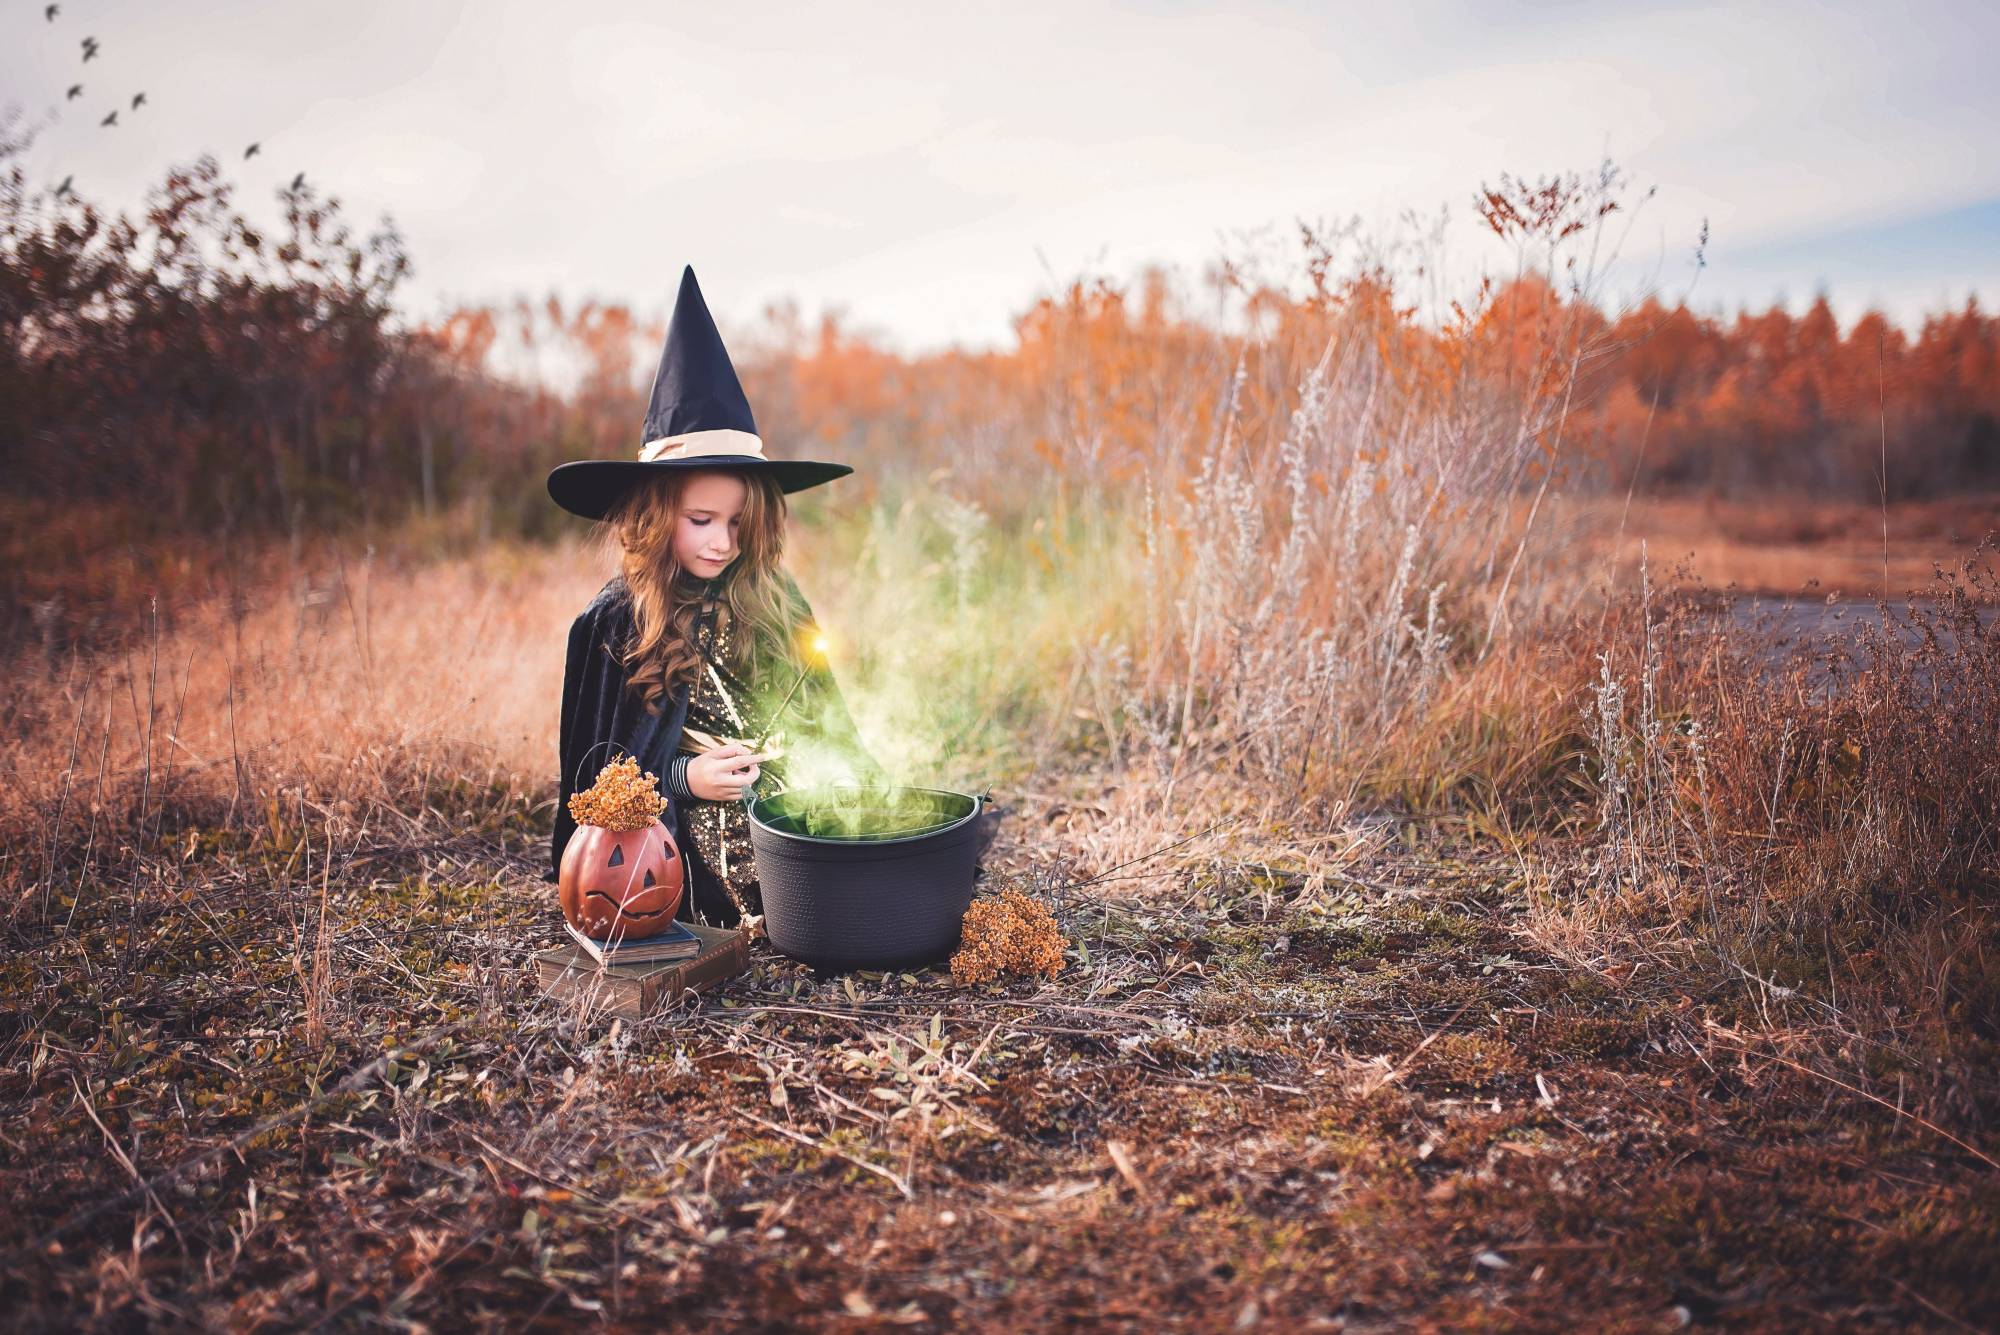 A girl dressed in a witch costume sitting by a black cauldron.